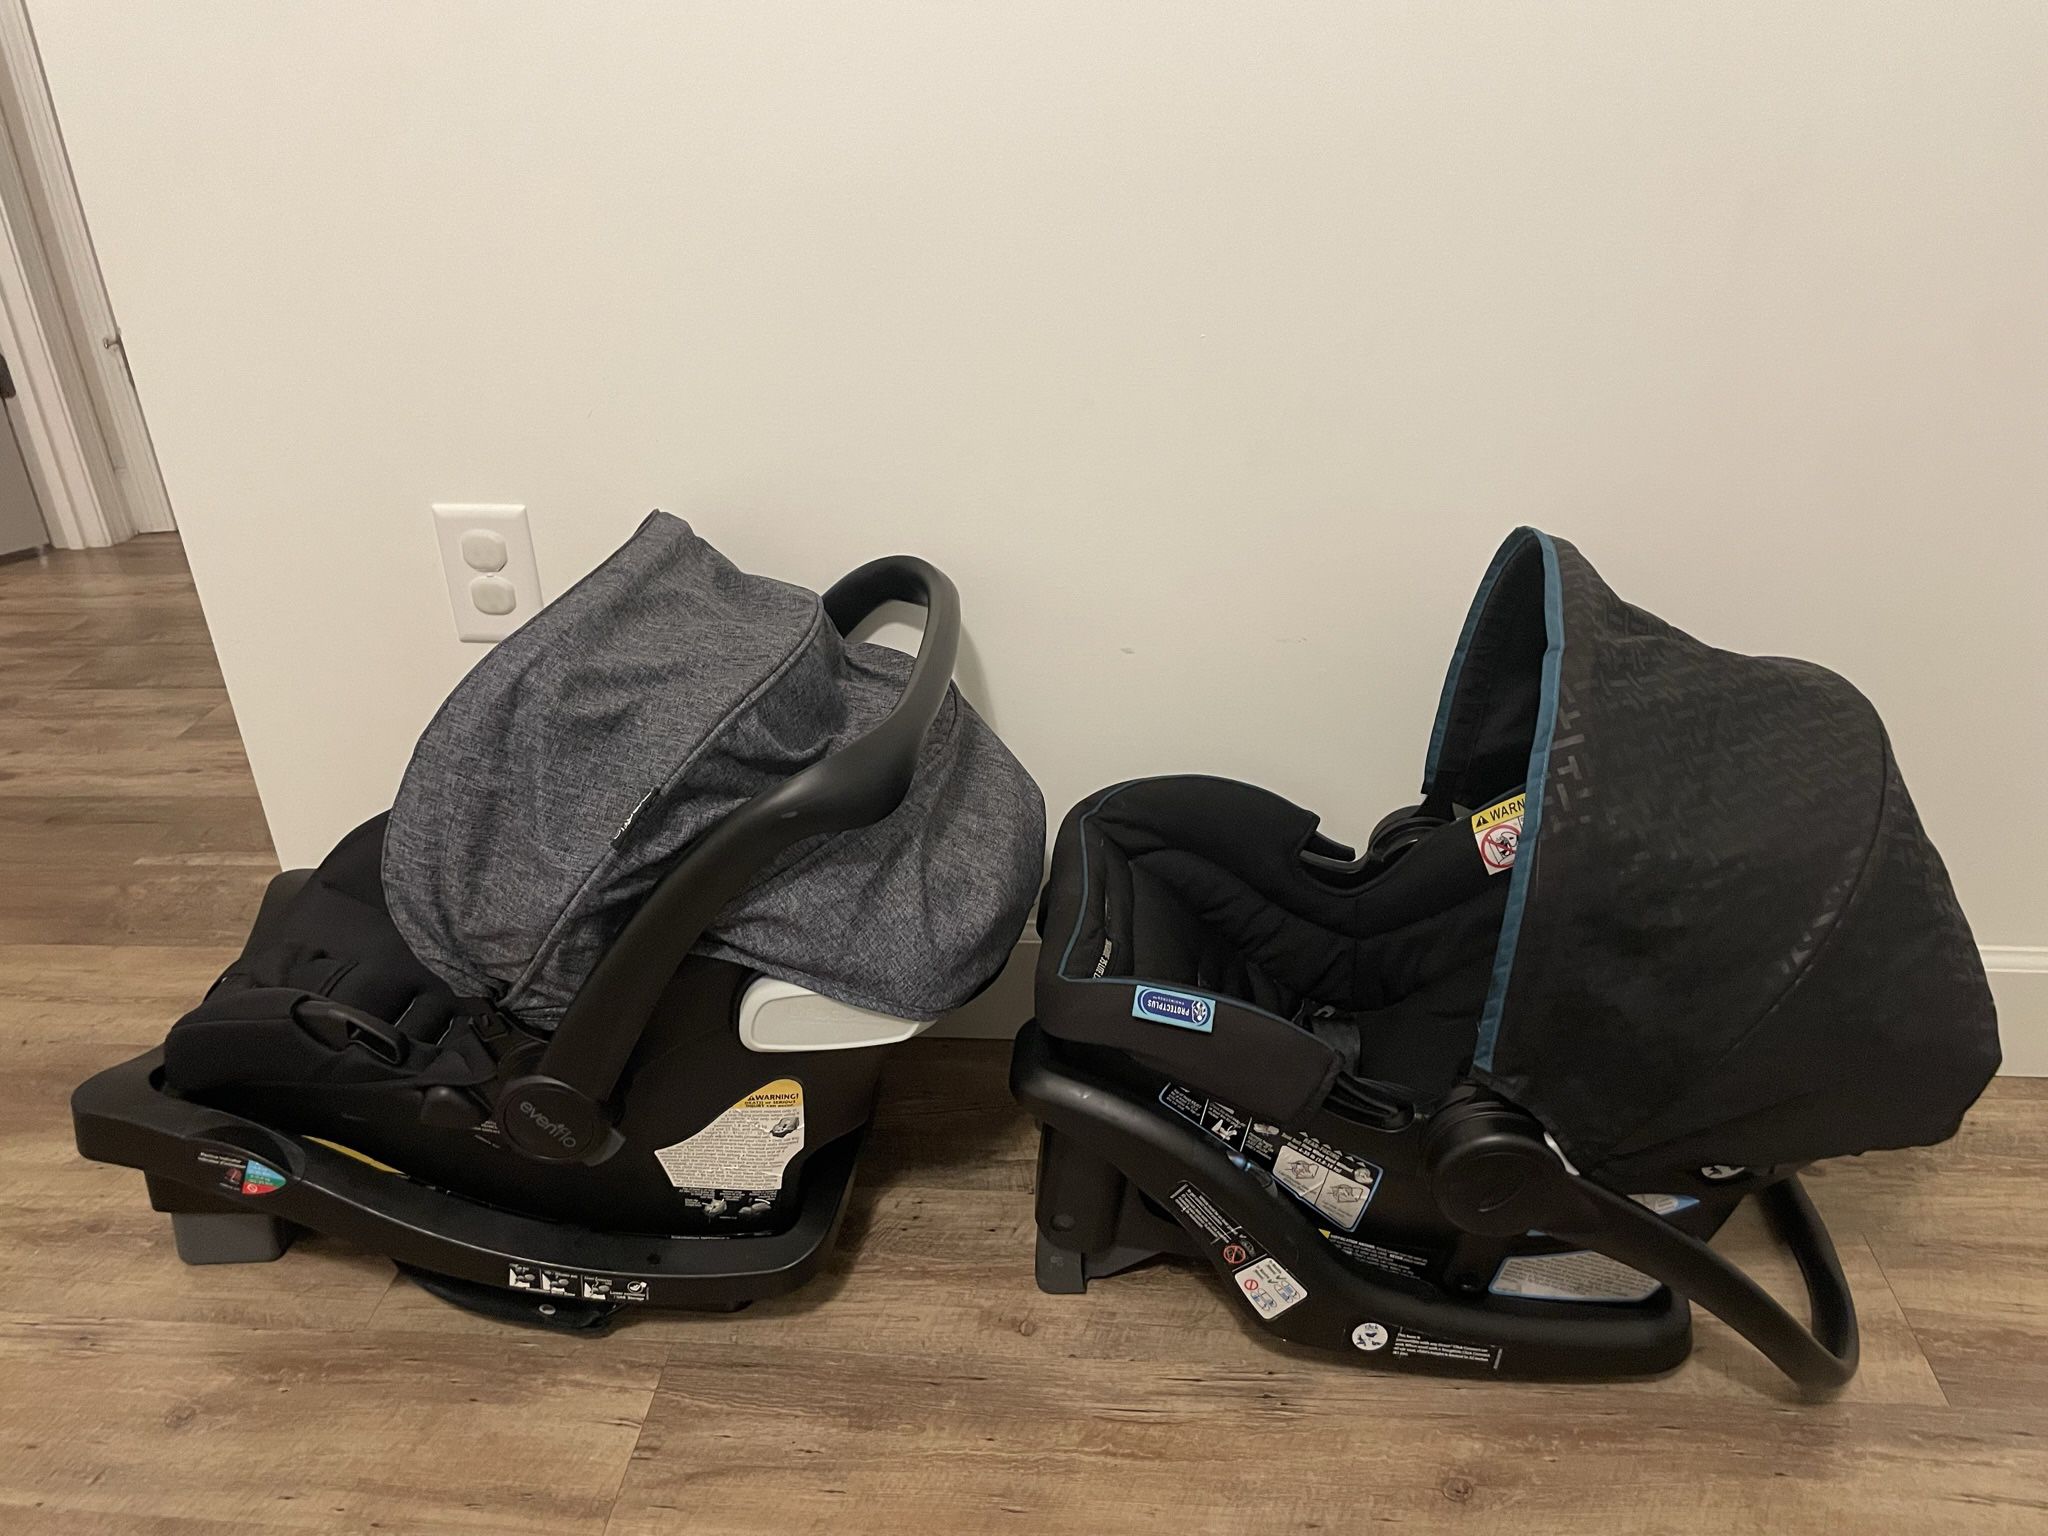 Infant Car Seats Two For 100